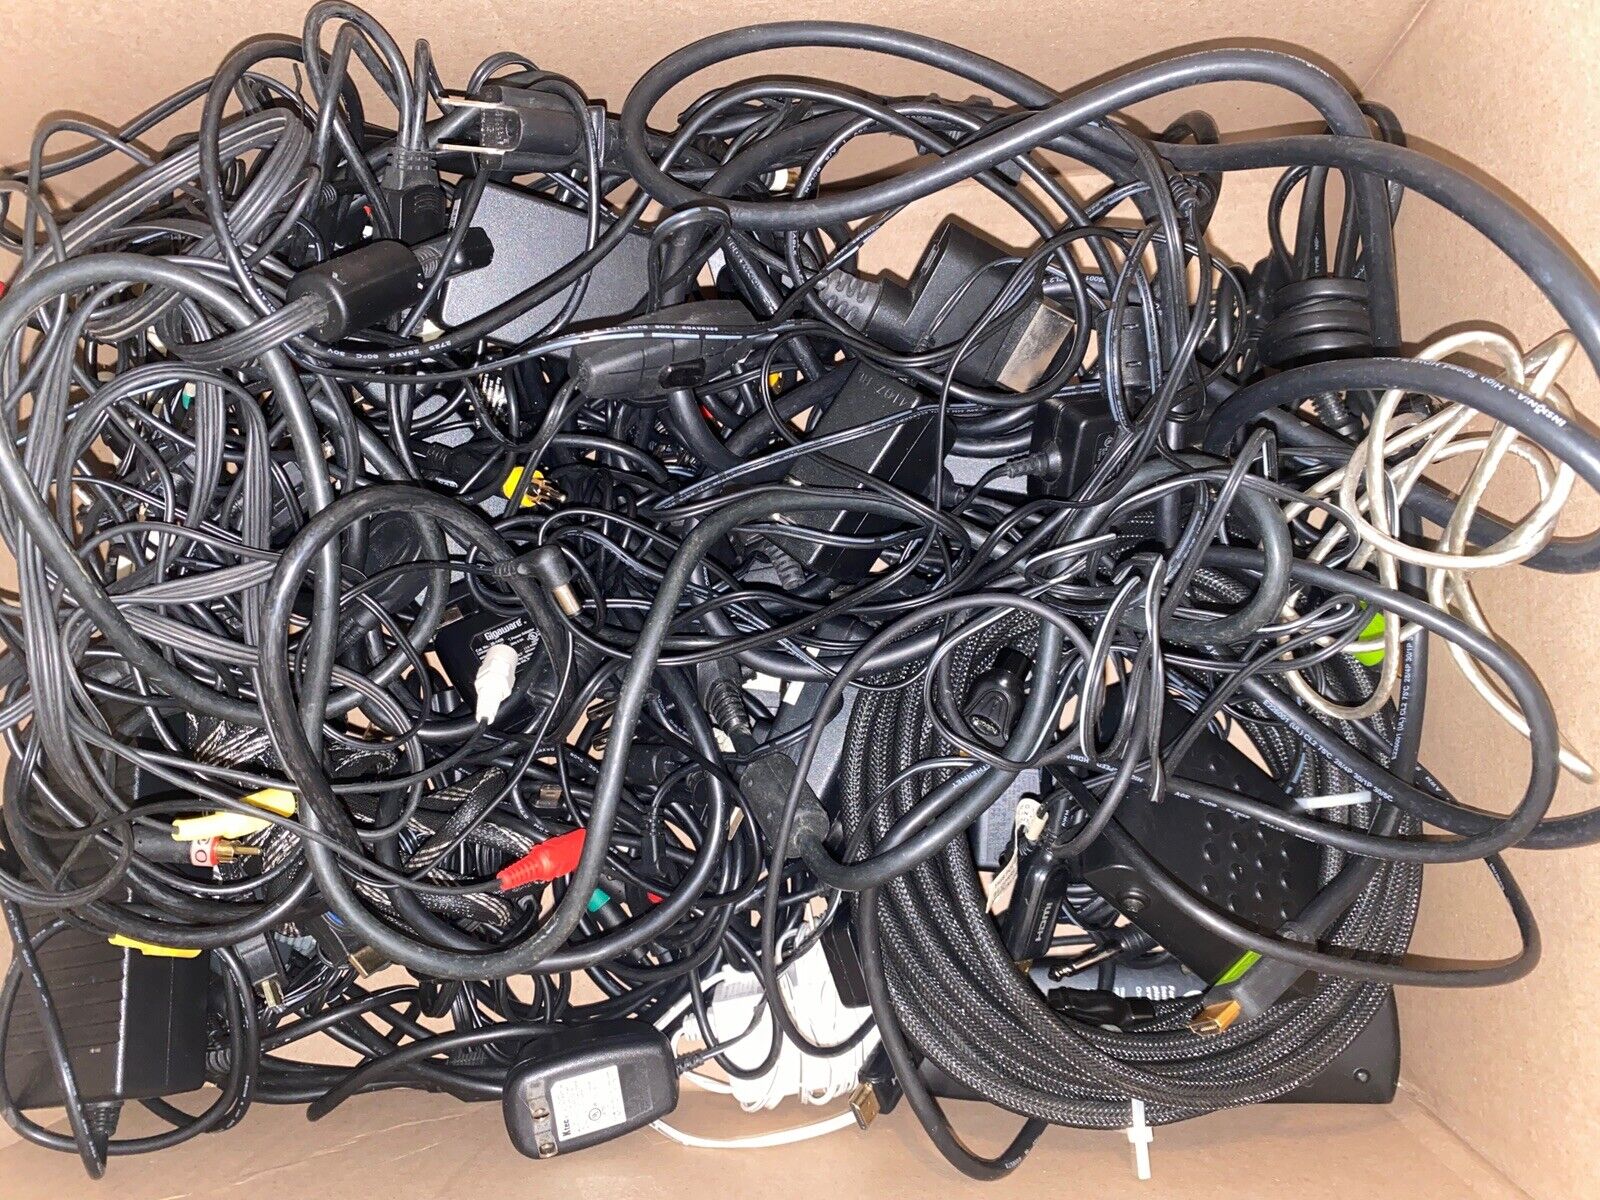 LOT of 50+ 3-Prong AC Adapters Power Cords Etc.. Nice lot Every Cord Here